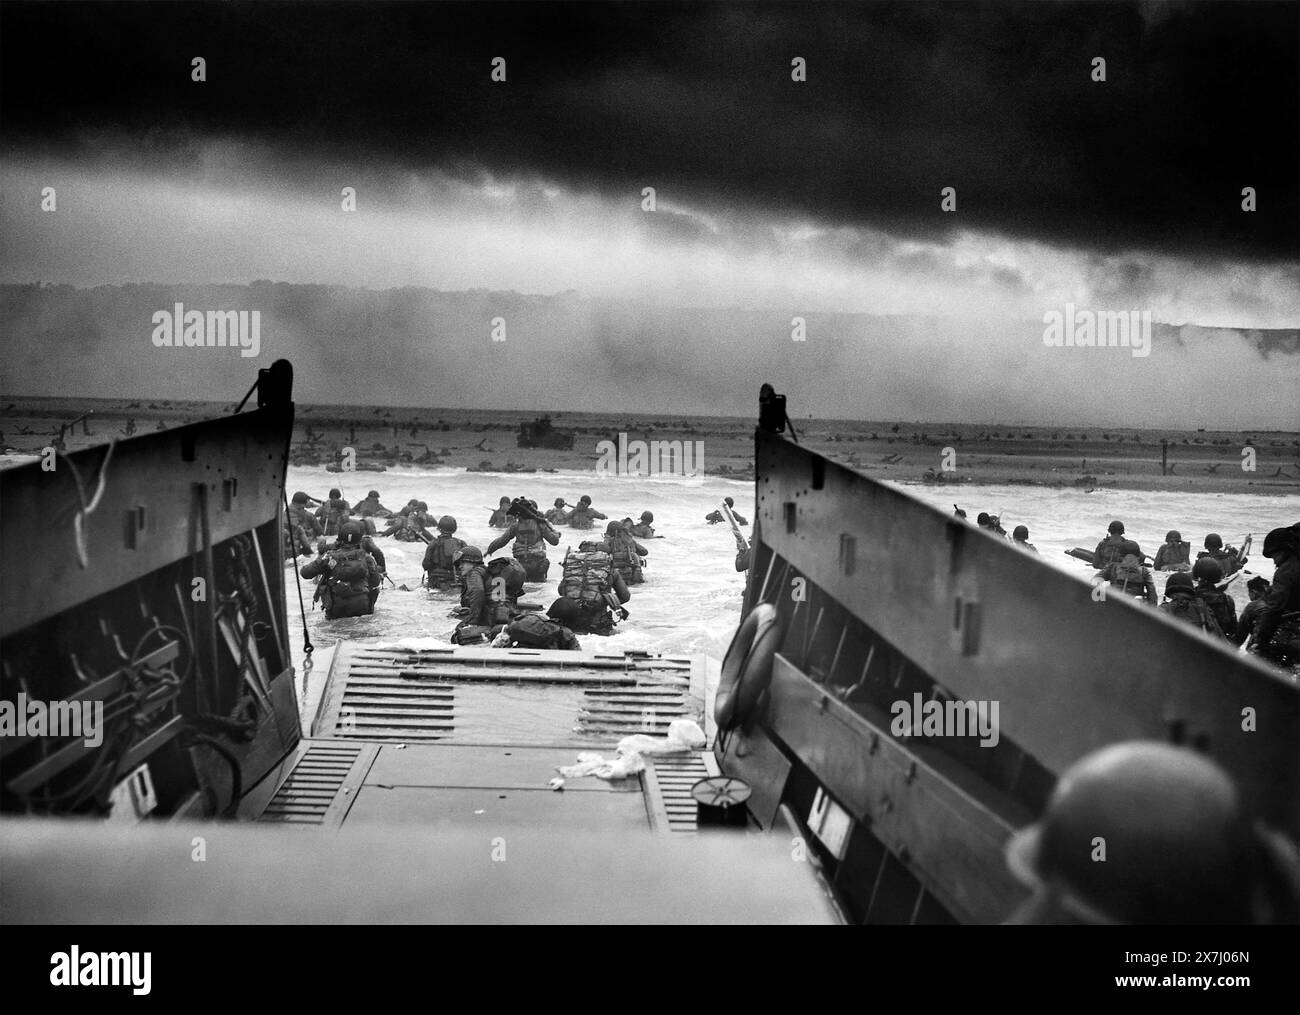 D-Day, Normandy Landings. An LCVP from the USS Samuel Chase disembarks troops of the 1st Infantry Division onto Omaha Beach for the D-Day landings on the morning of June 6, 1944. Stock Photo